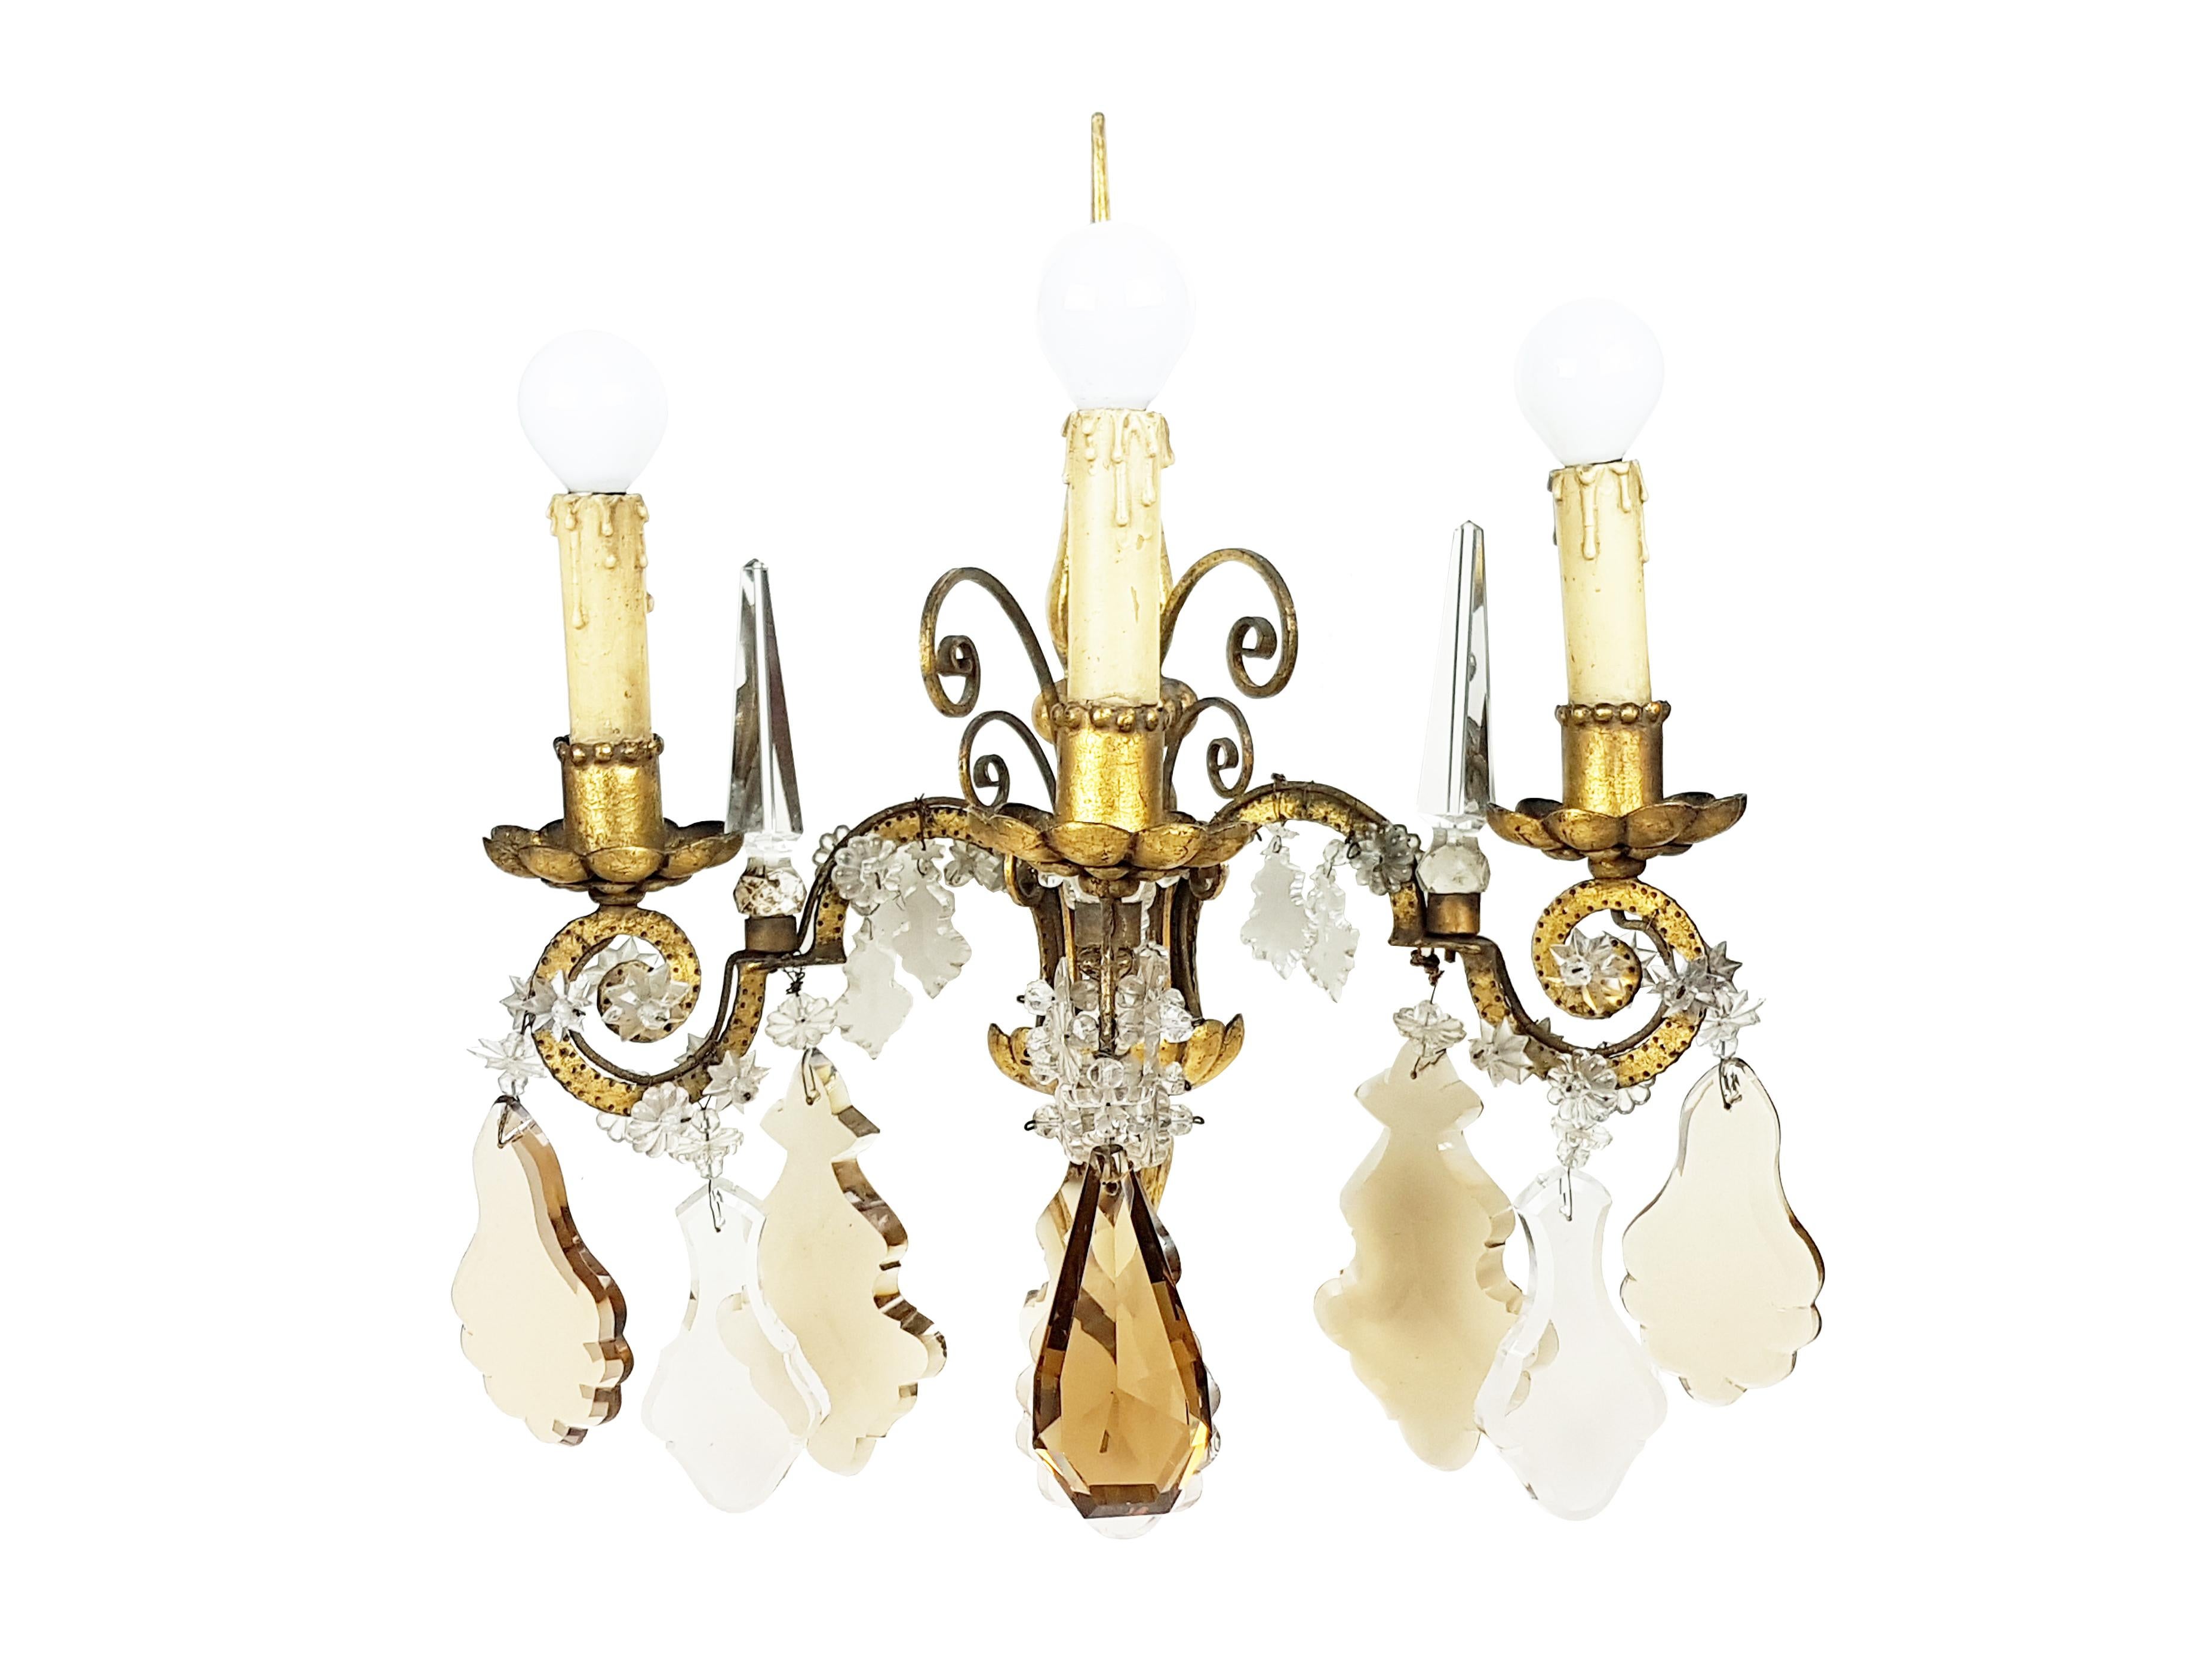 This pair of wall lamps was produced in Italy in the 1930s. It consists of a golden leaf metal structure with different faceted crystal elements such as obelisks and stars. Each lamp is equipped with 2 lamp holders (E14 small size). The electrical